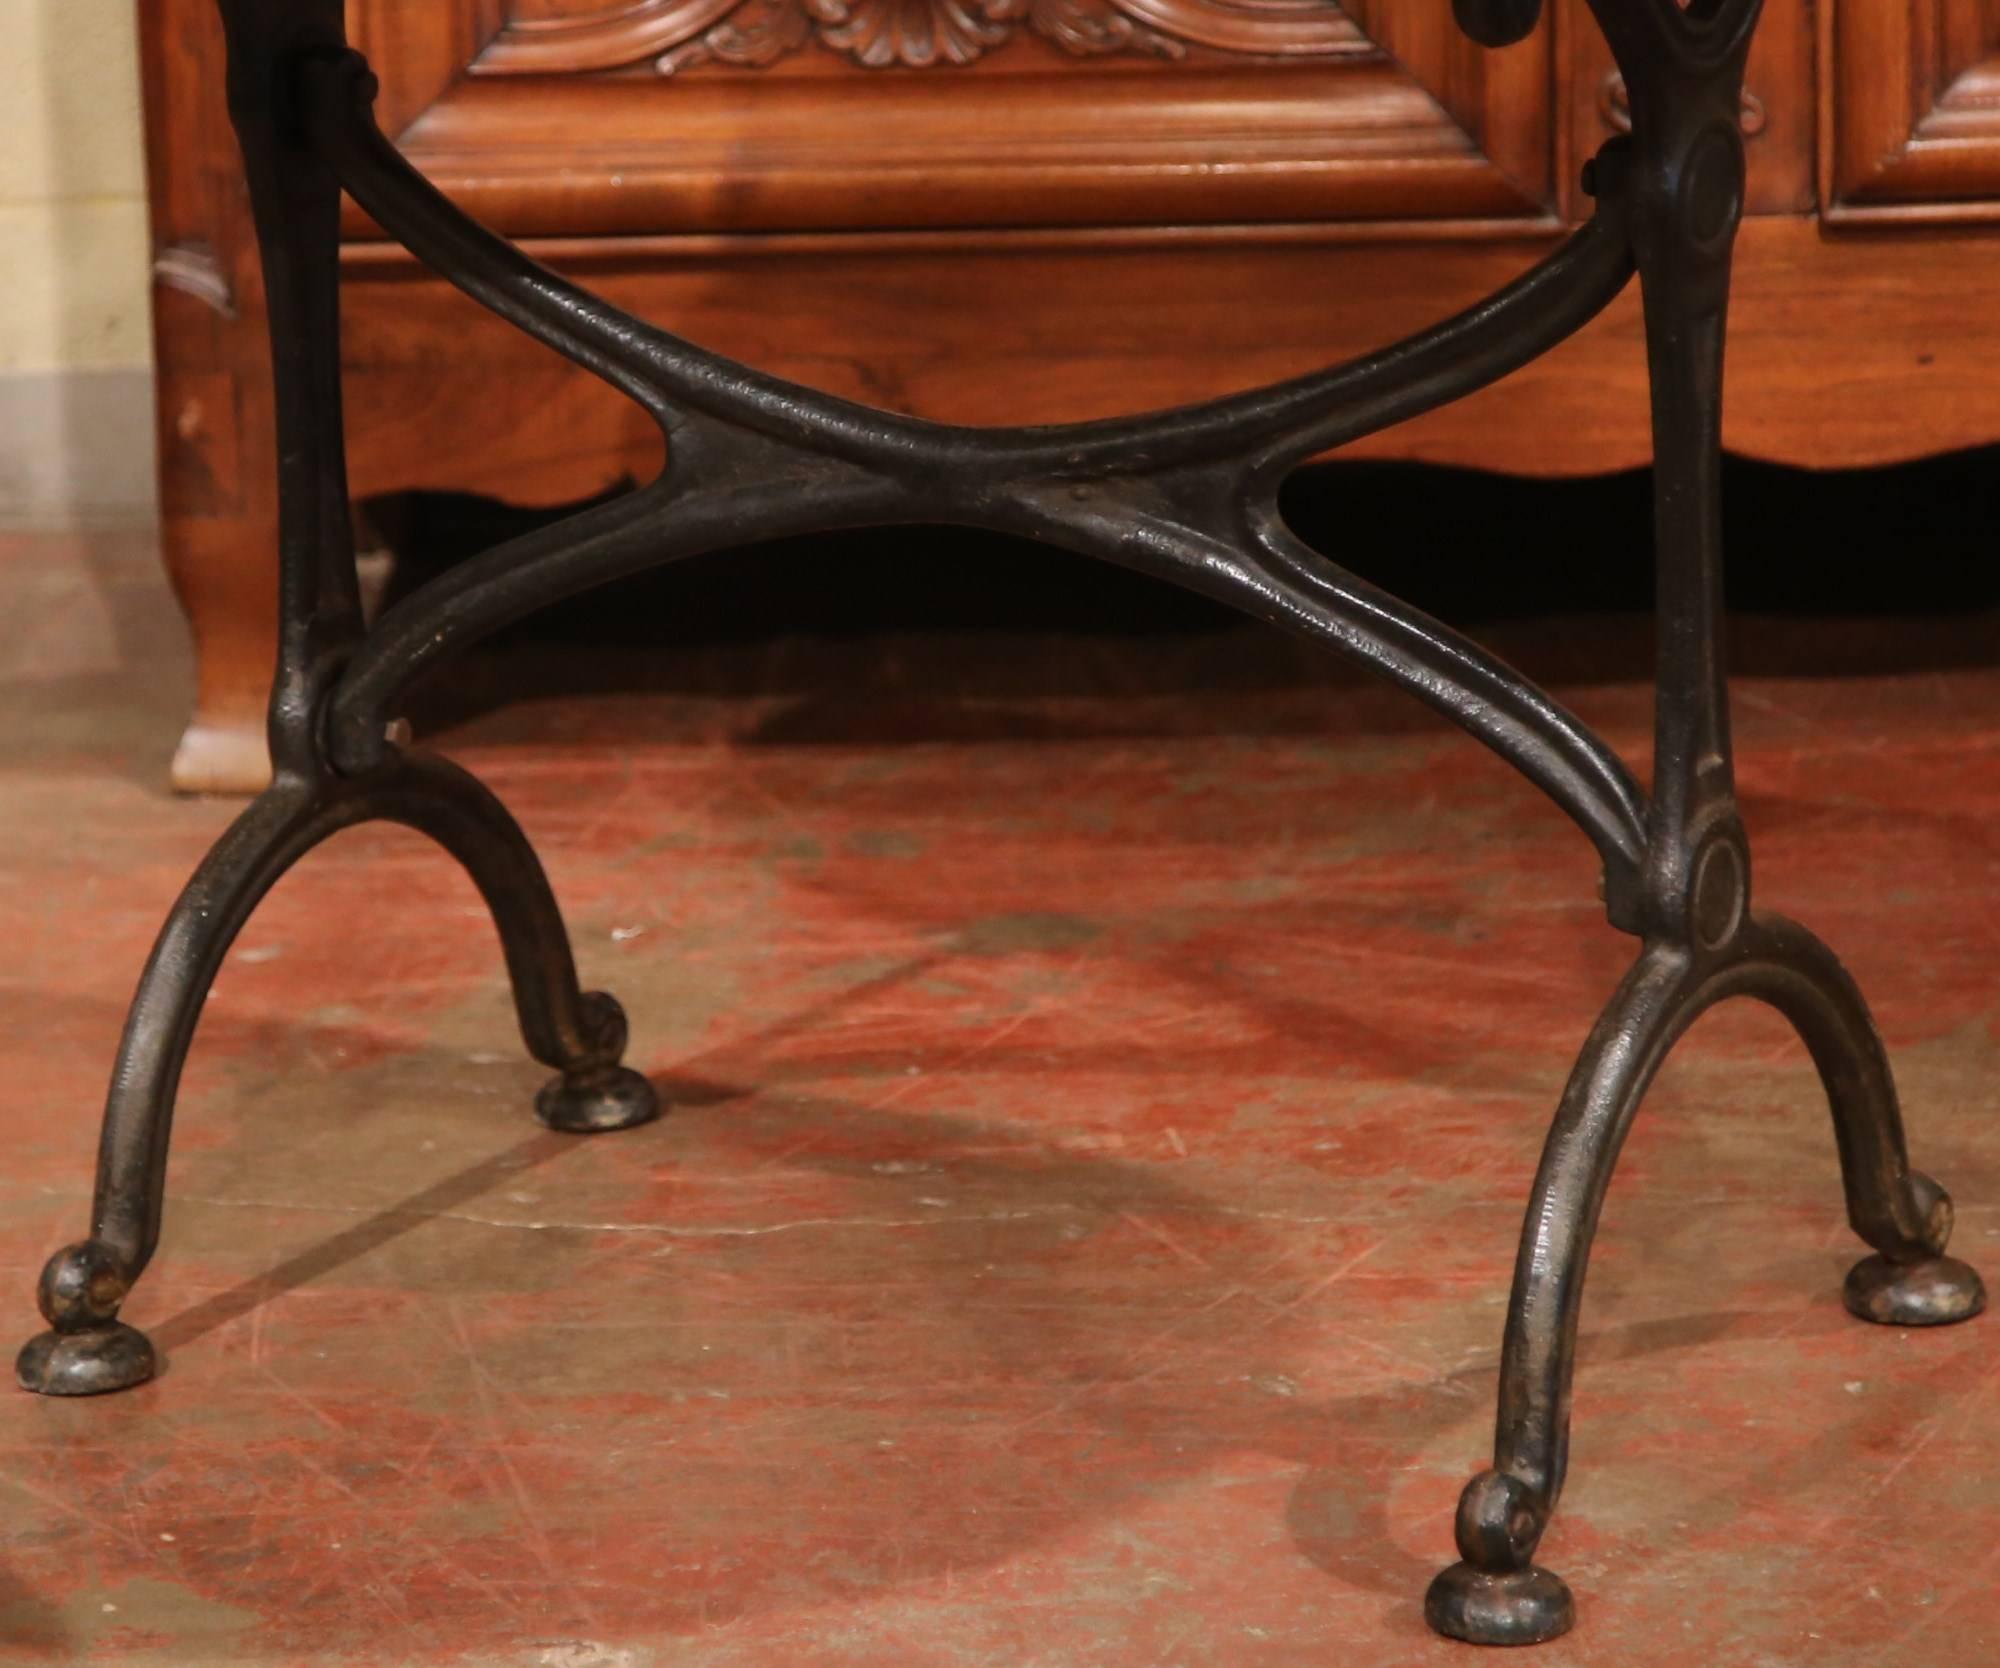 Bring the beauty of Paris, France into your home with this sophisticated black iron and white marble antique oval bistrot table. Crafted in 1920, this table is a great size for a small breakfast room, or a work table to Craft pastries. The table is